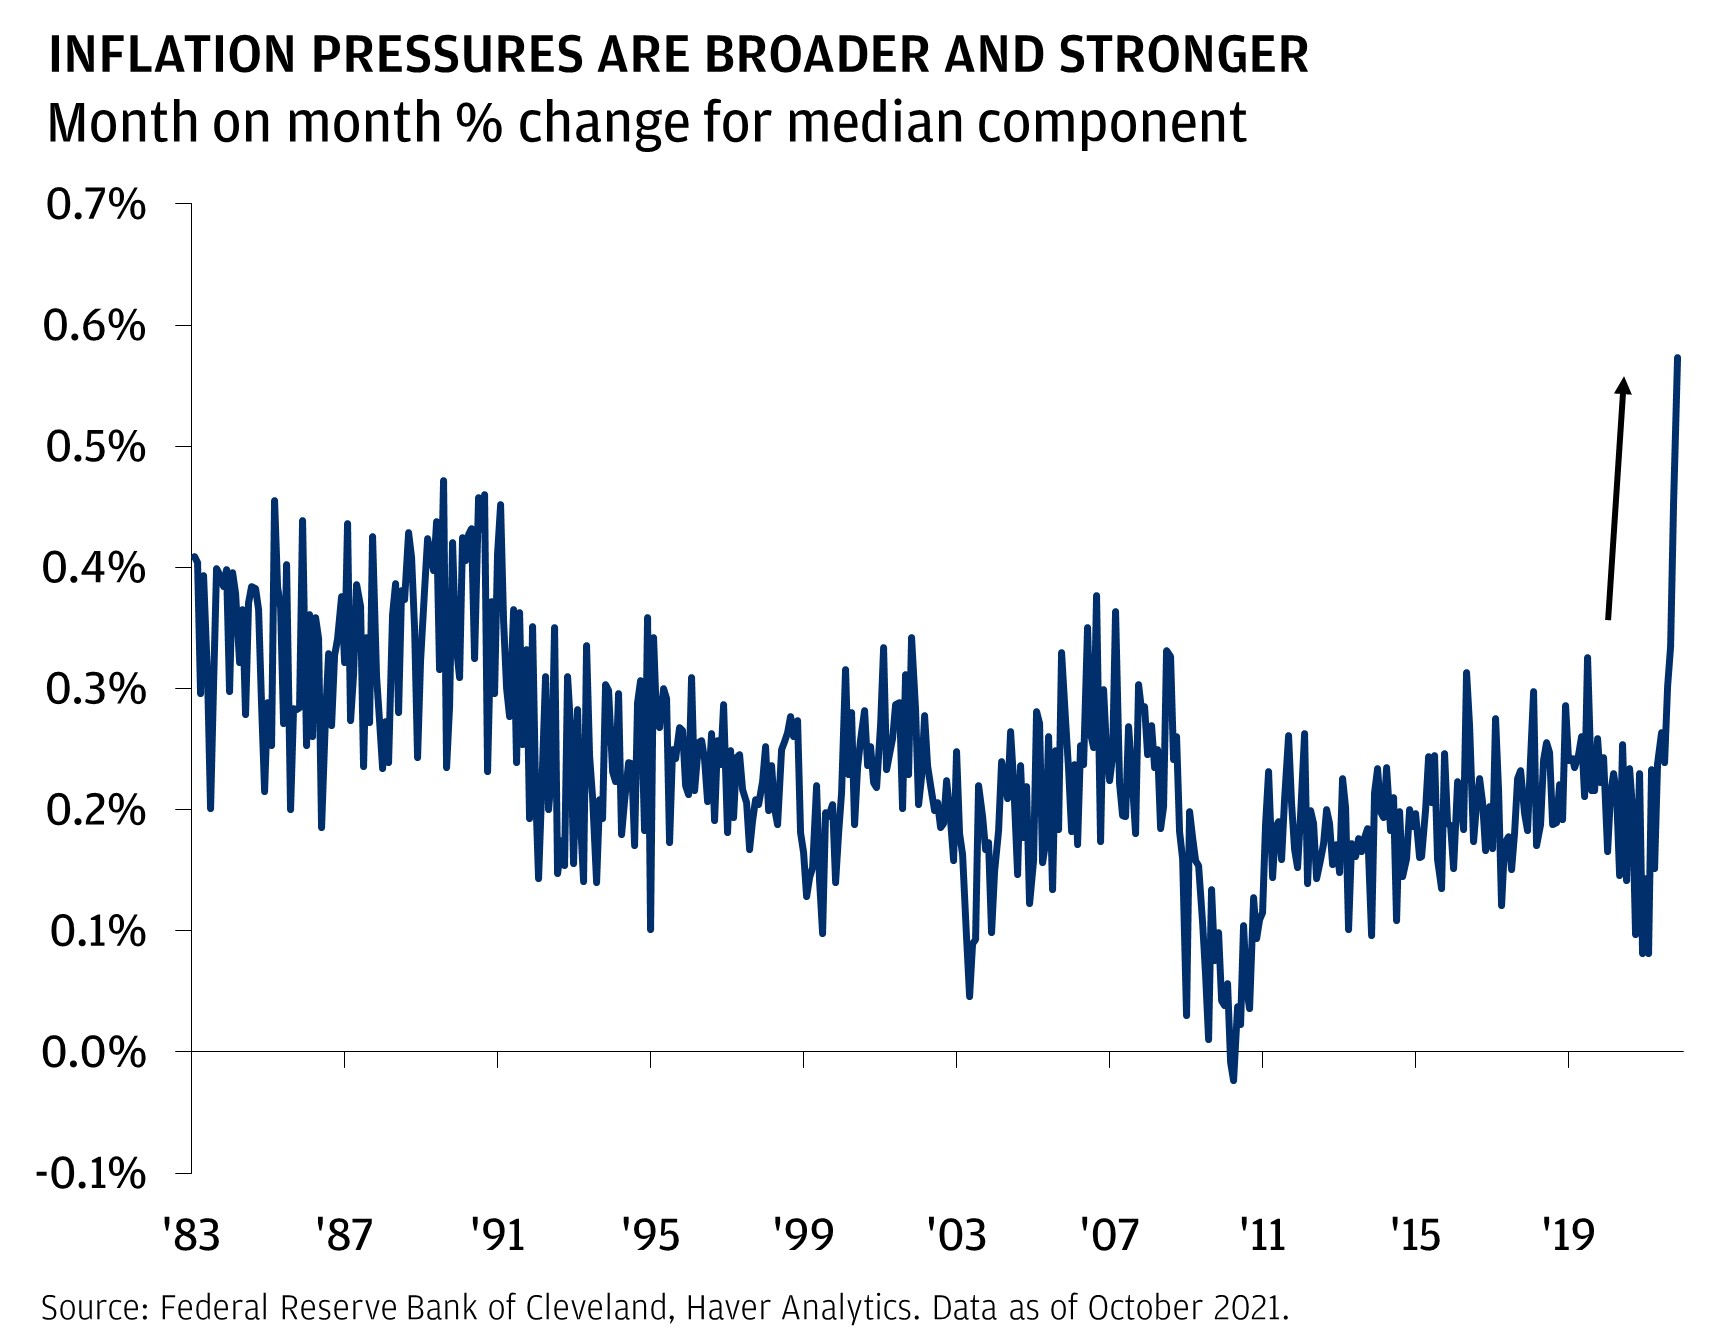 Inflation pressures are broader and stronger